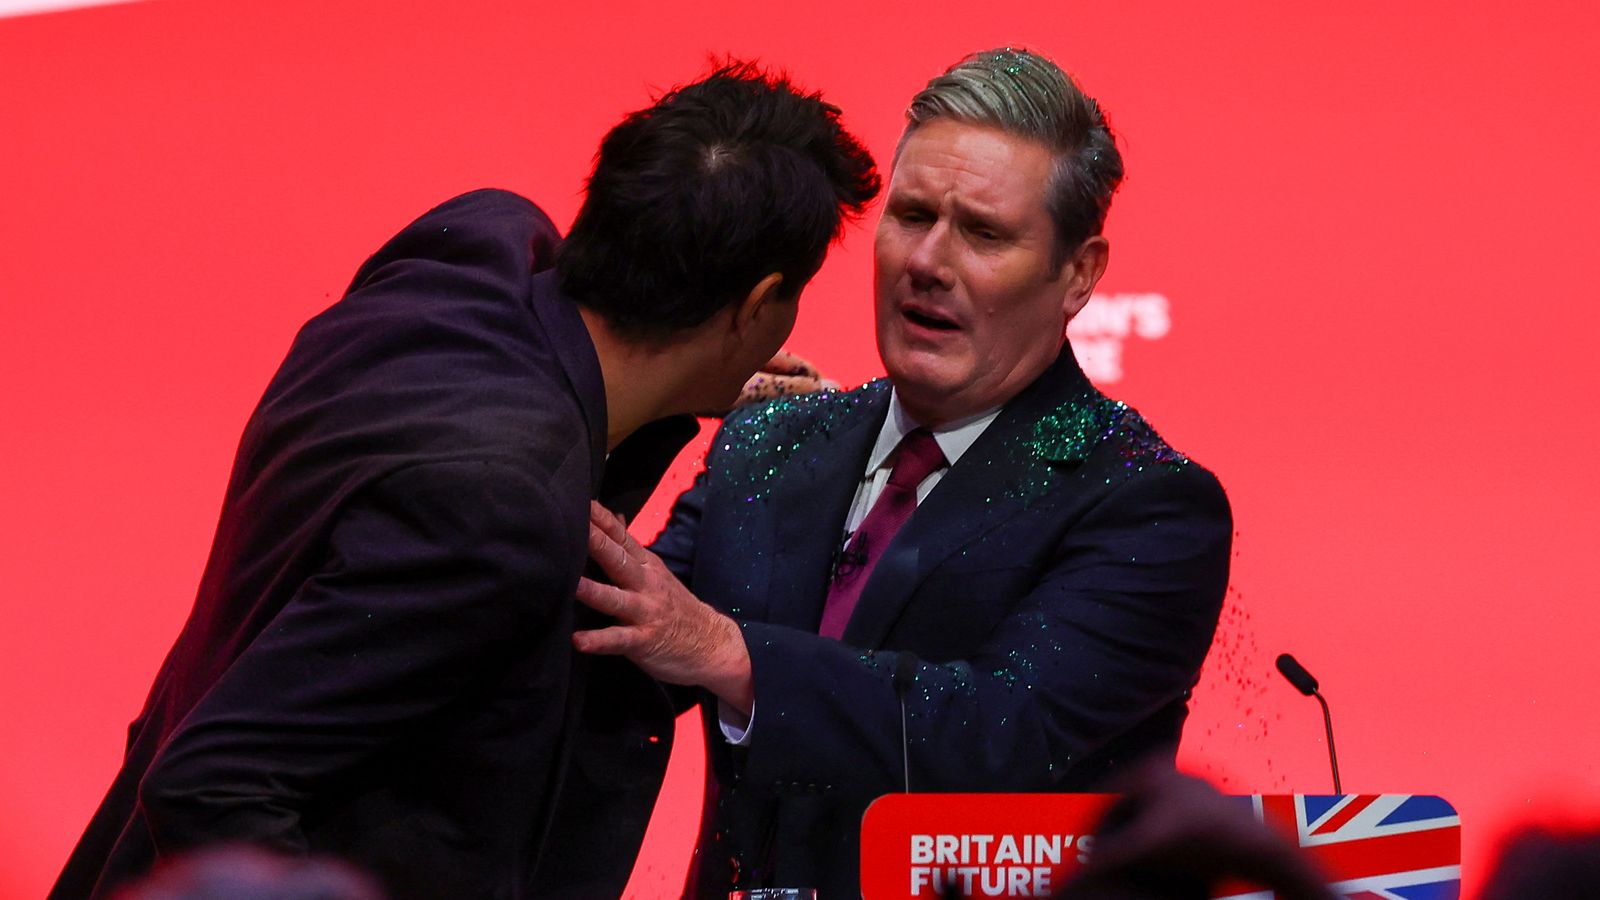 Sir Keir Starmer glitter protester admits he 'crossed the line' and apologises